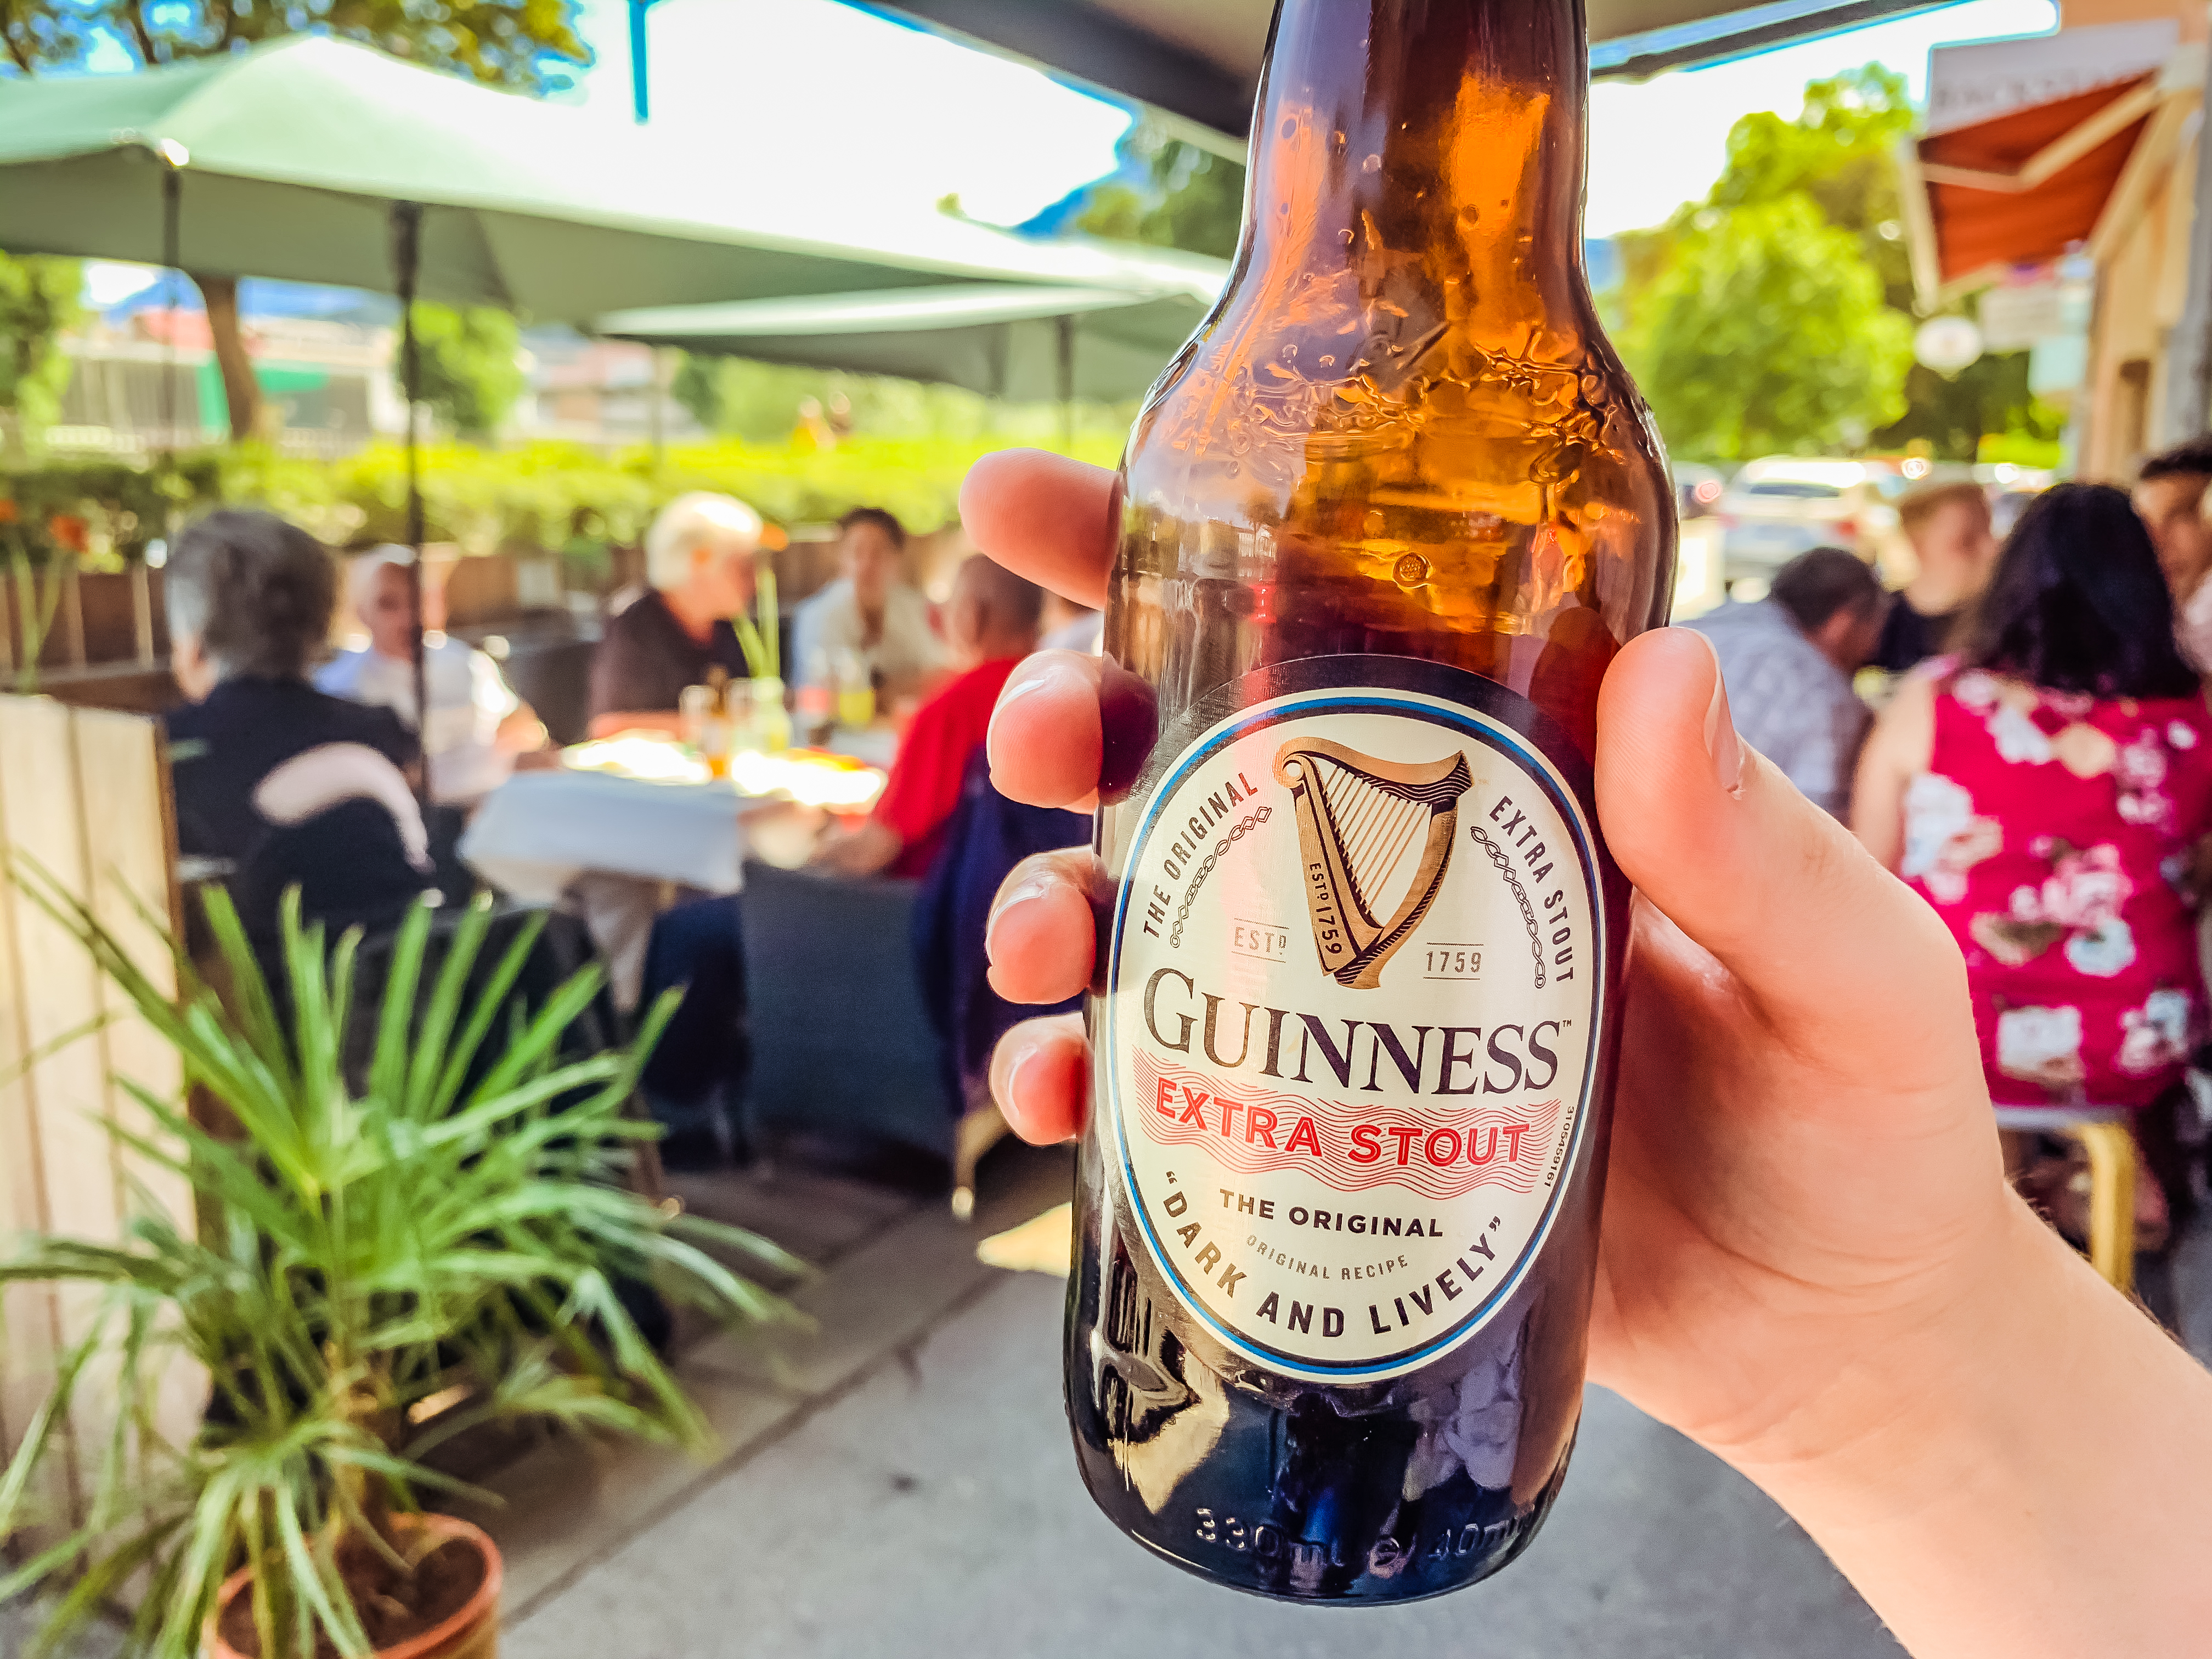 A chilled Guinness in the hot sun